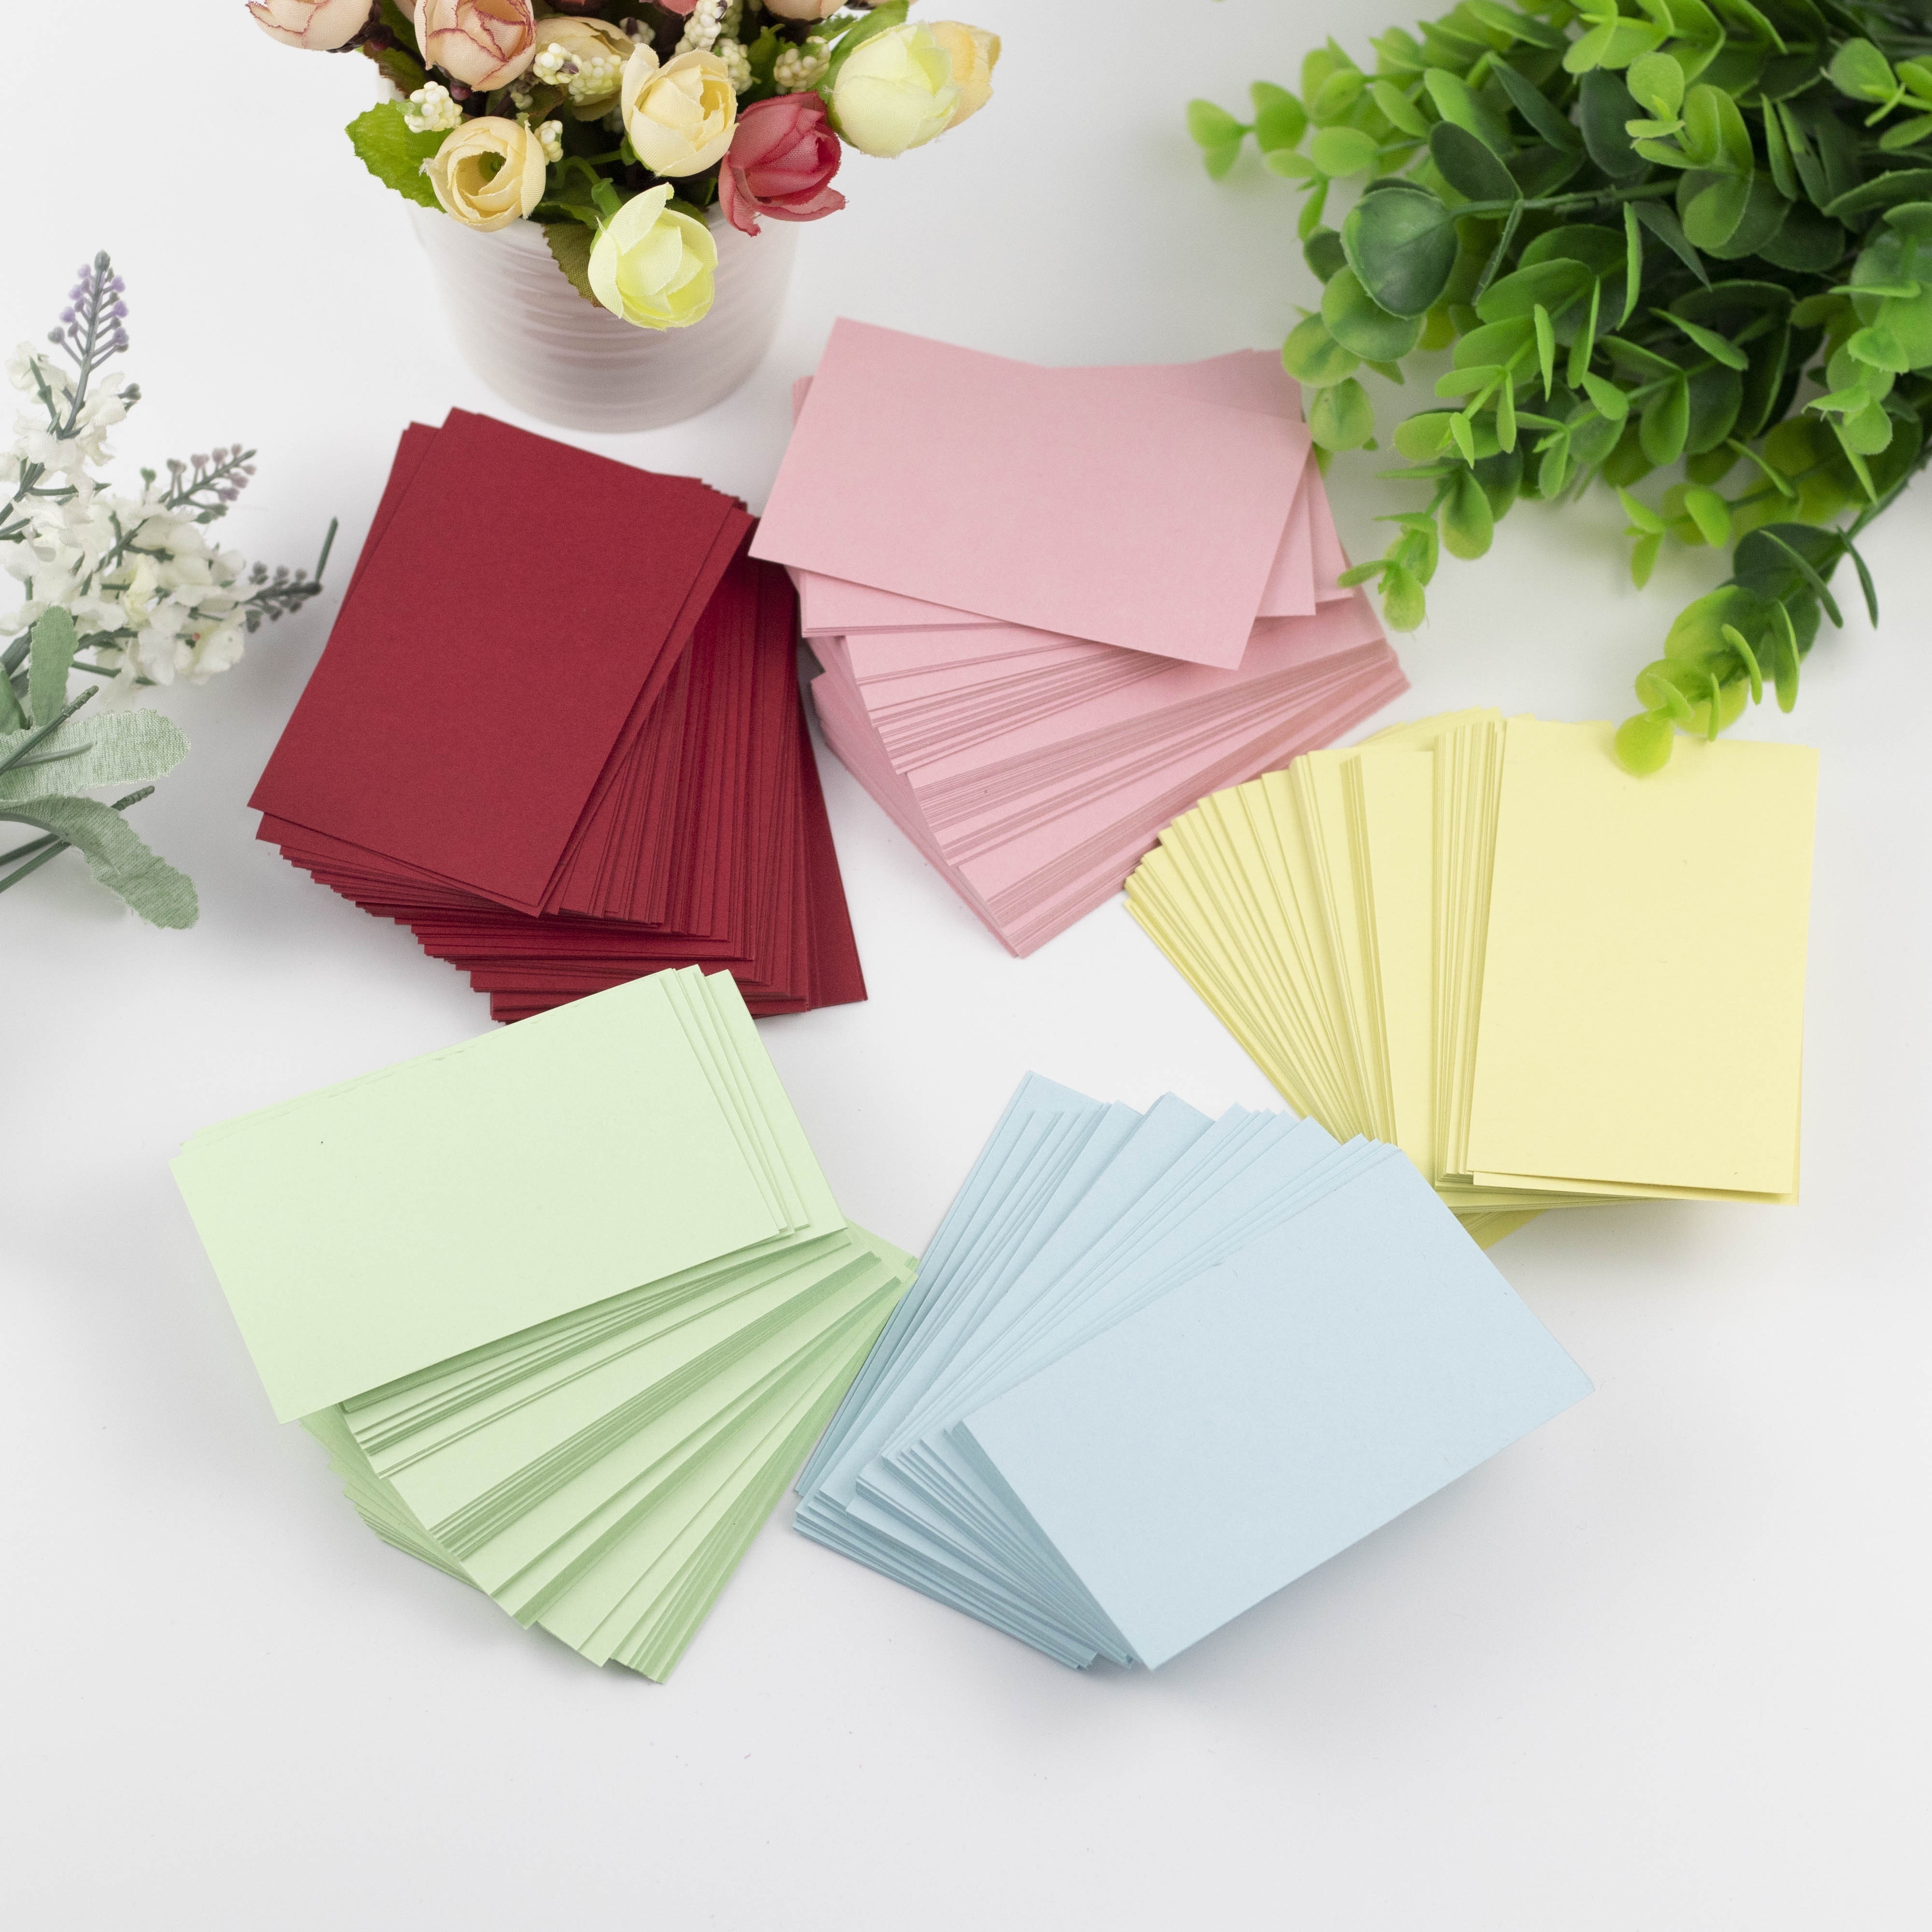 100 Sheets Colored Cardstock 20 Super Rainbow Colors 220gsm For DIY Art,  Students Paper Scrapbooking, Crafts Making